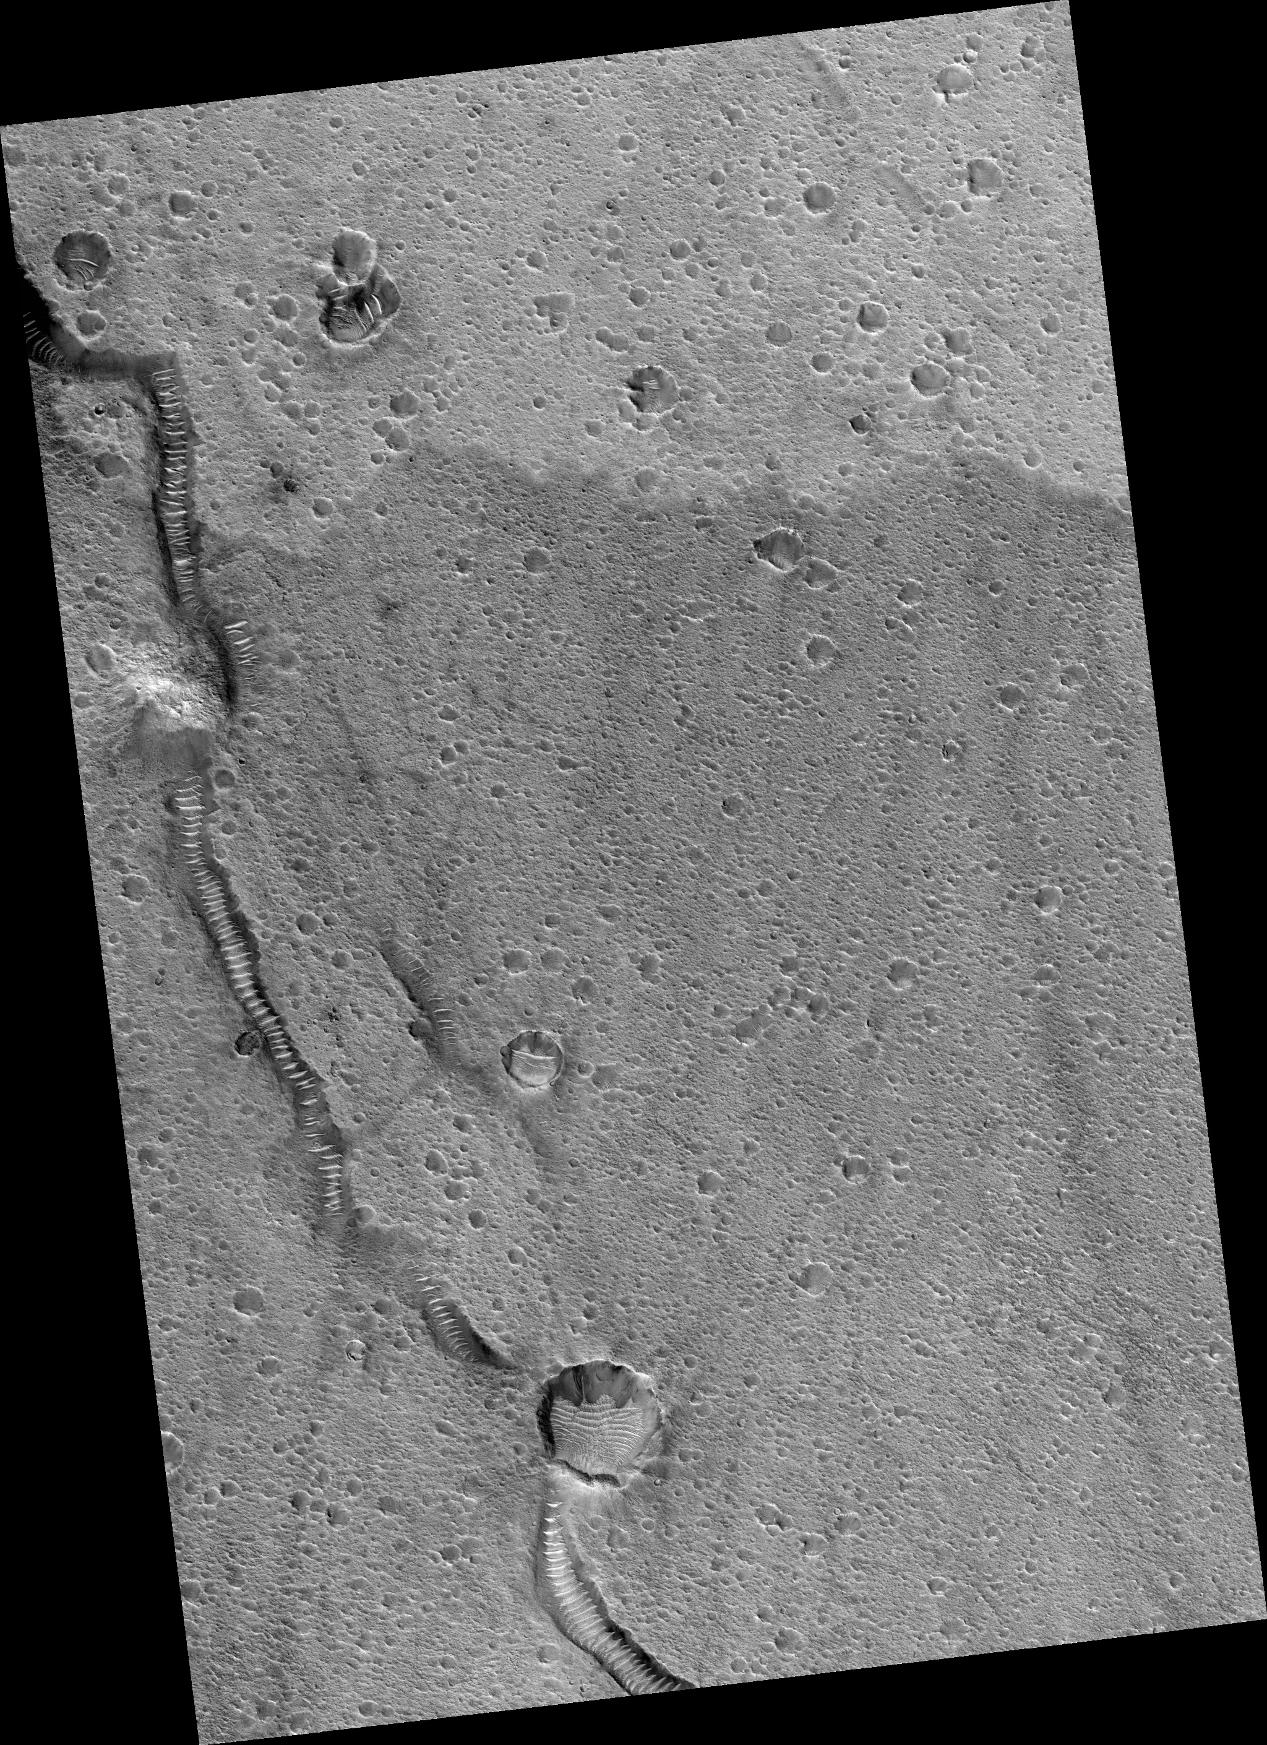 This image shows part of the surface of Chryse Planitia, near the mouth of several of the giant outflow channels carved by massive floods. At this location the channel is much too large to be seen within a HiRISE image, and this shows an area of level plains near the mouth.